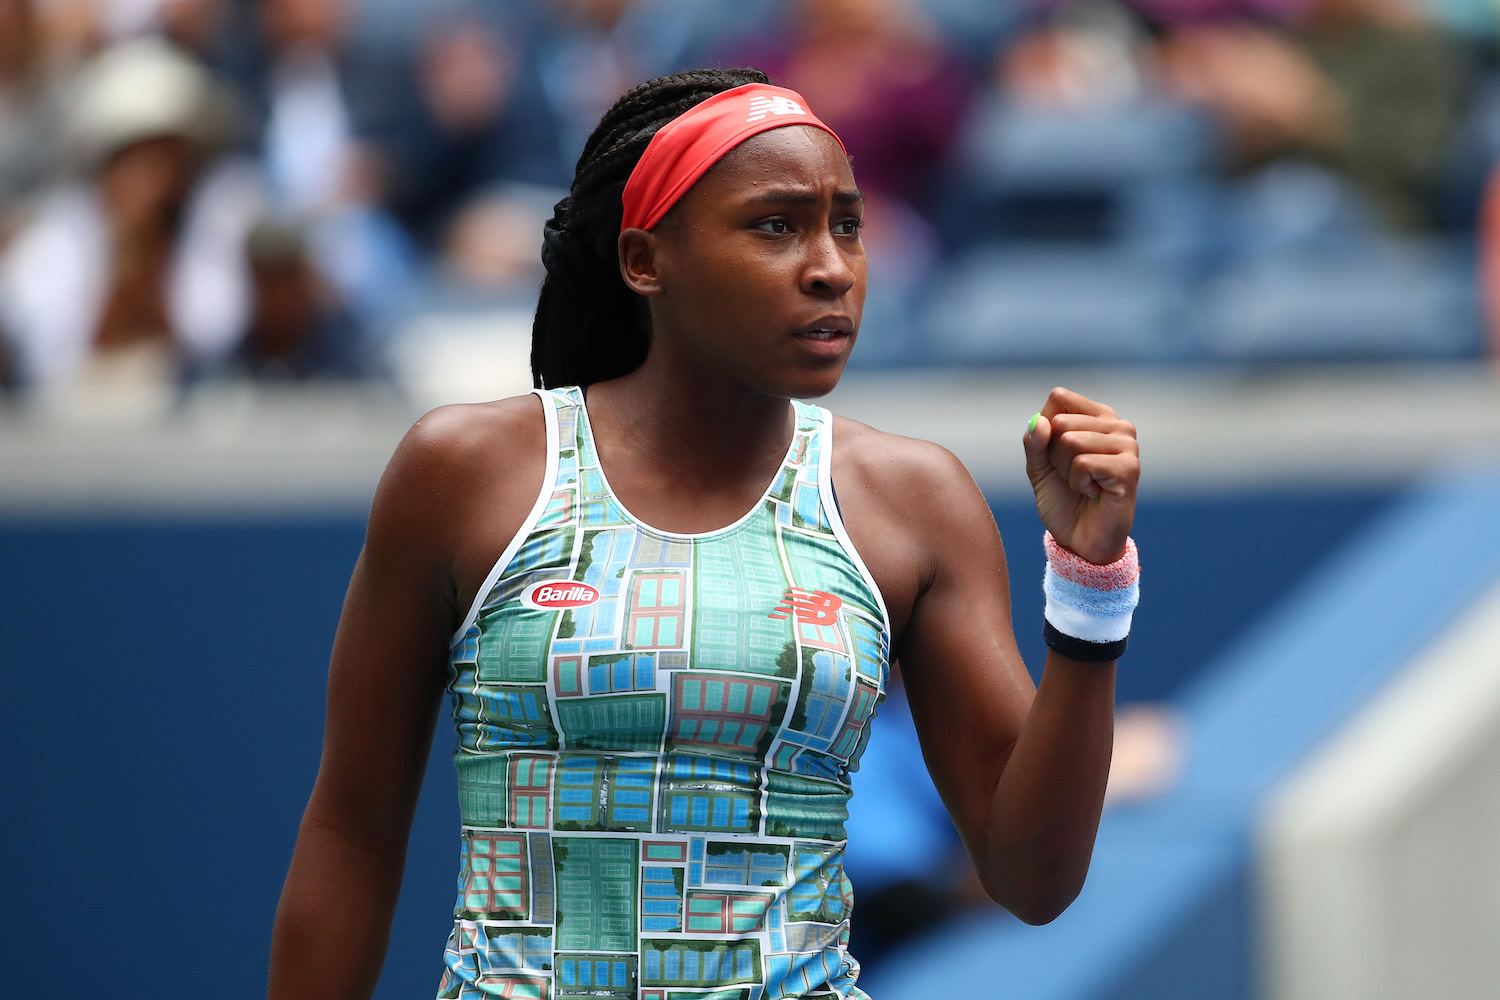 "She's different." Top U.S. coaches on Coco Gauff's fastrising star